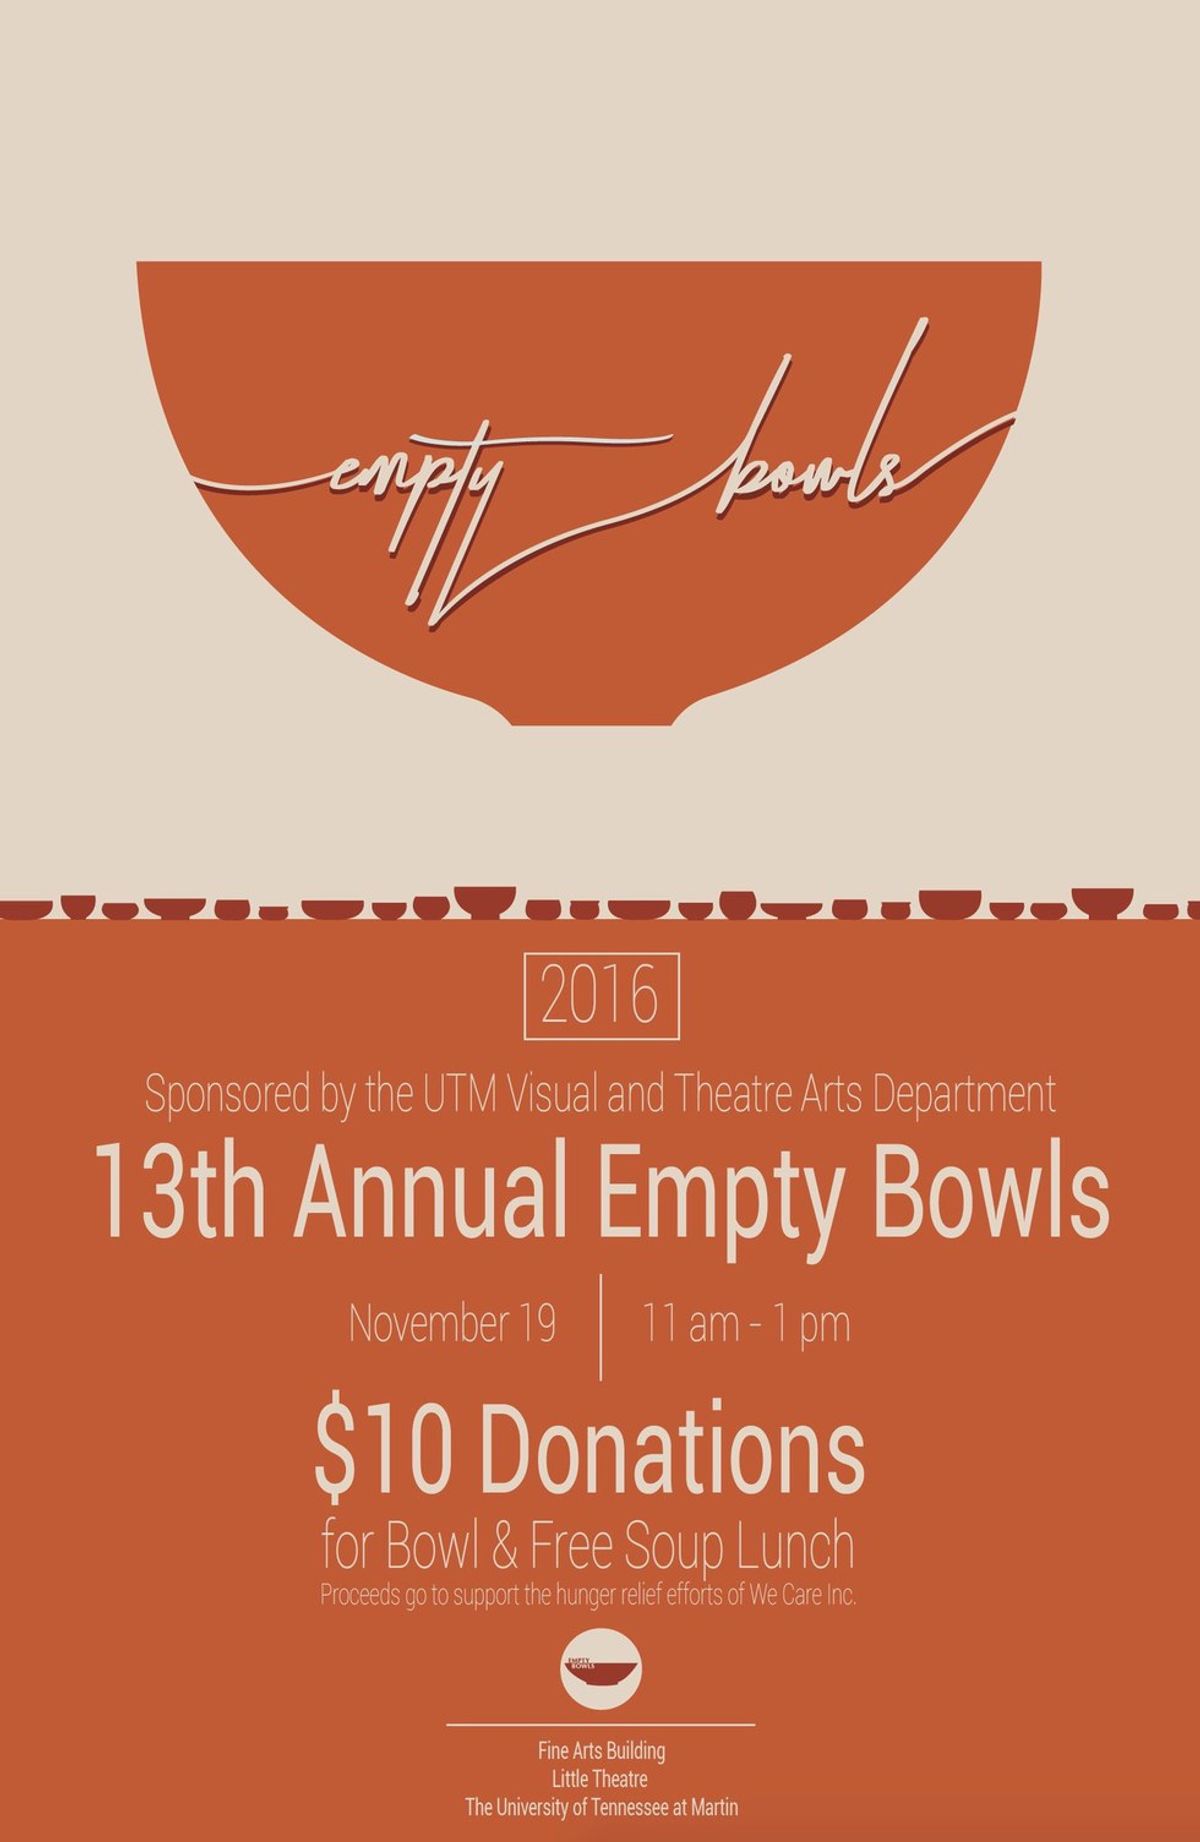 The 13th Annual Empty Bowls